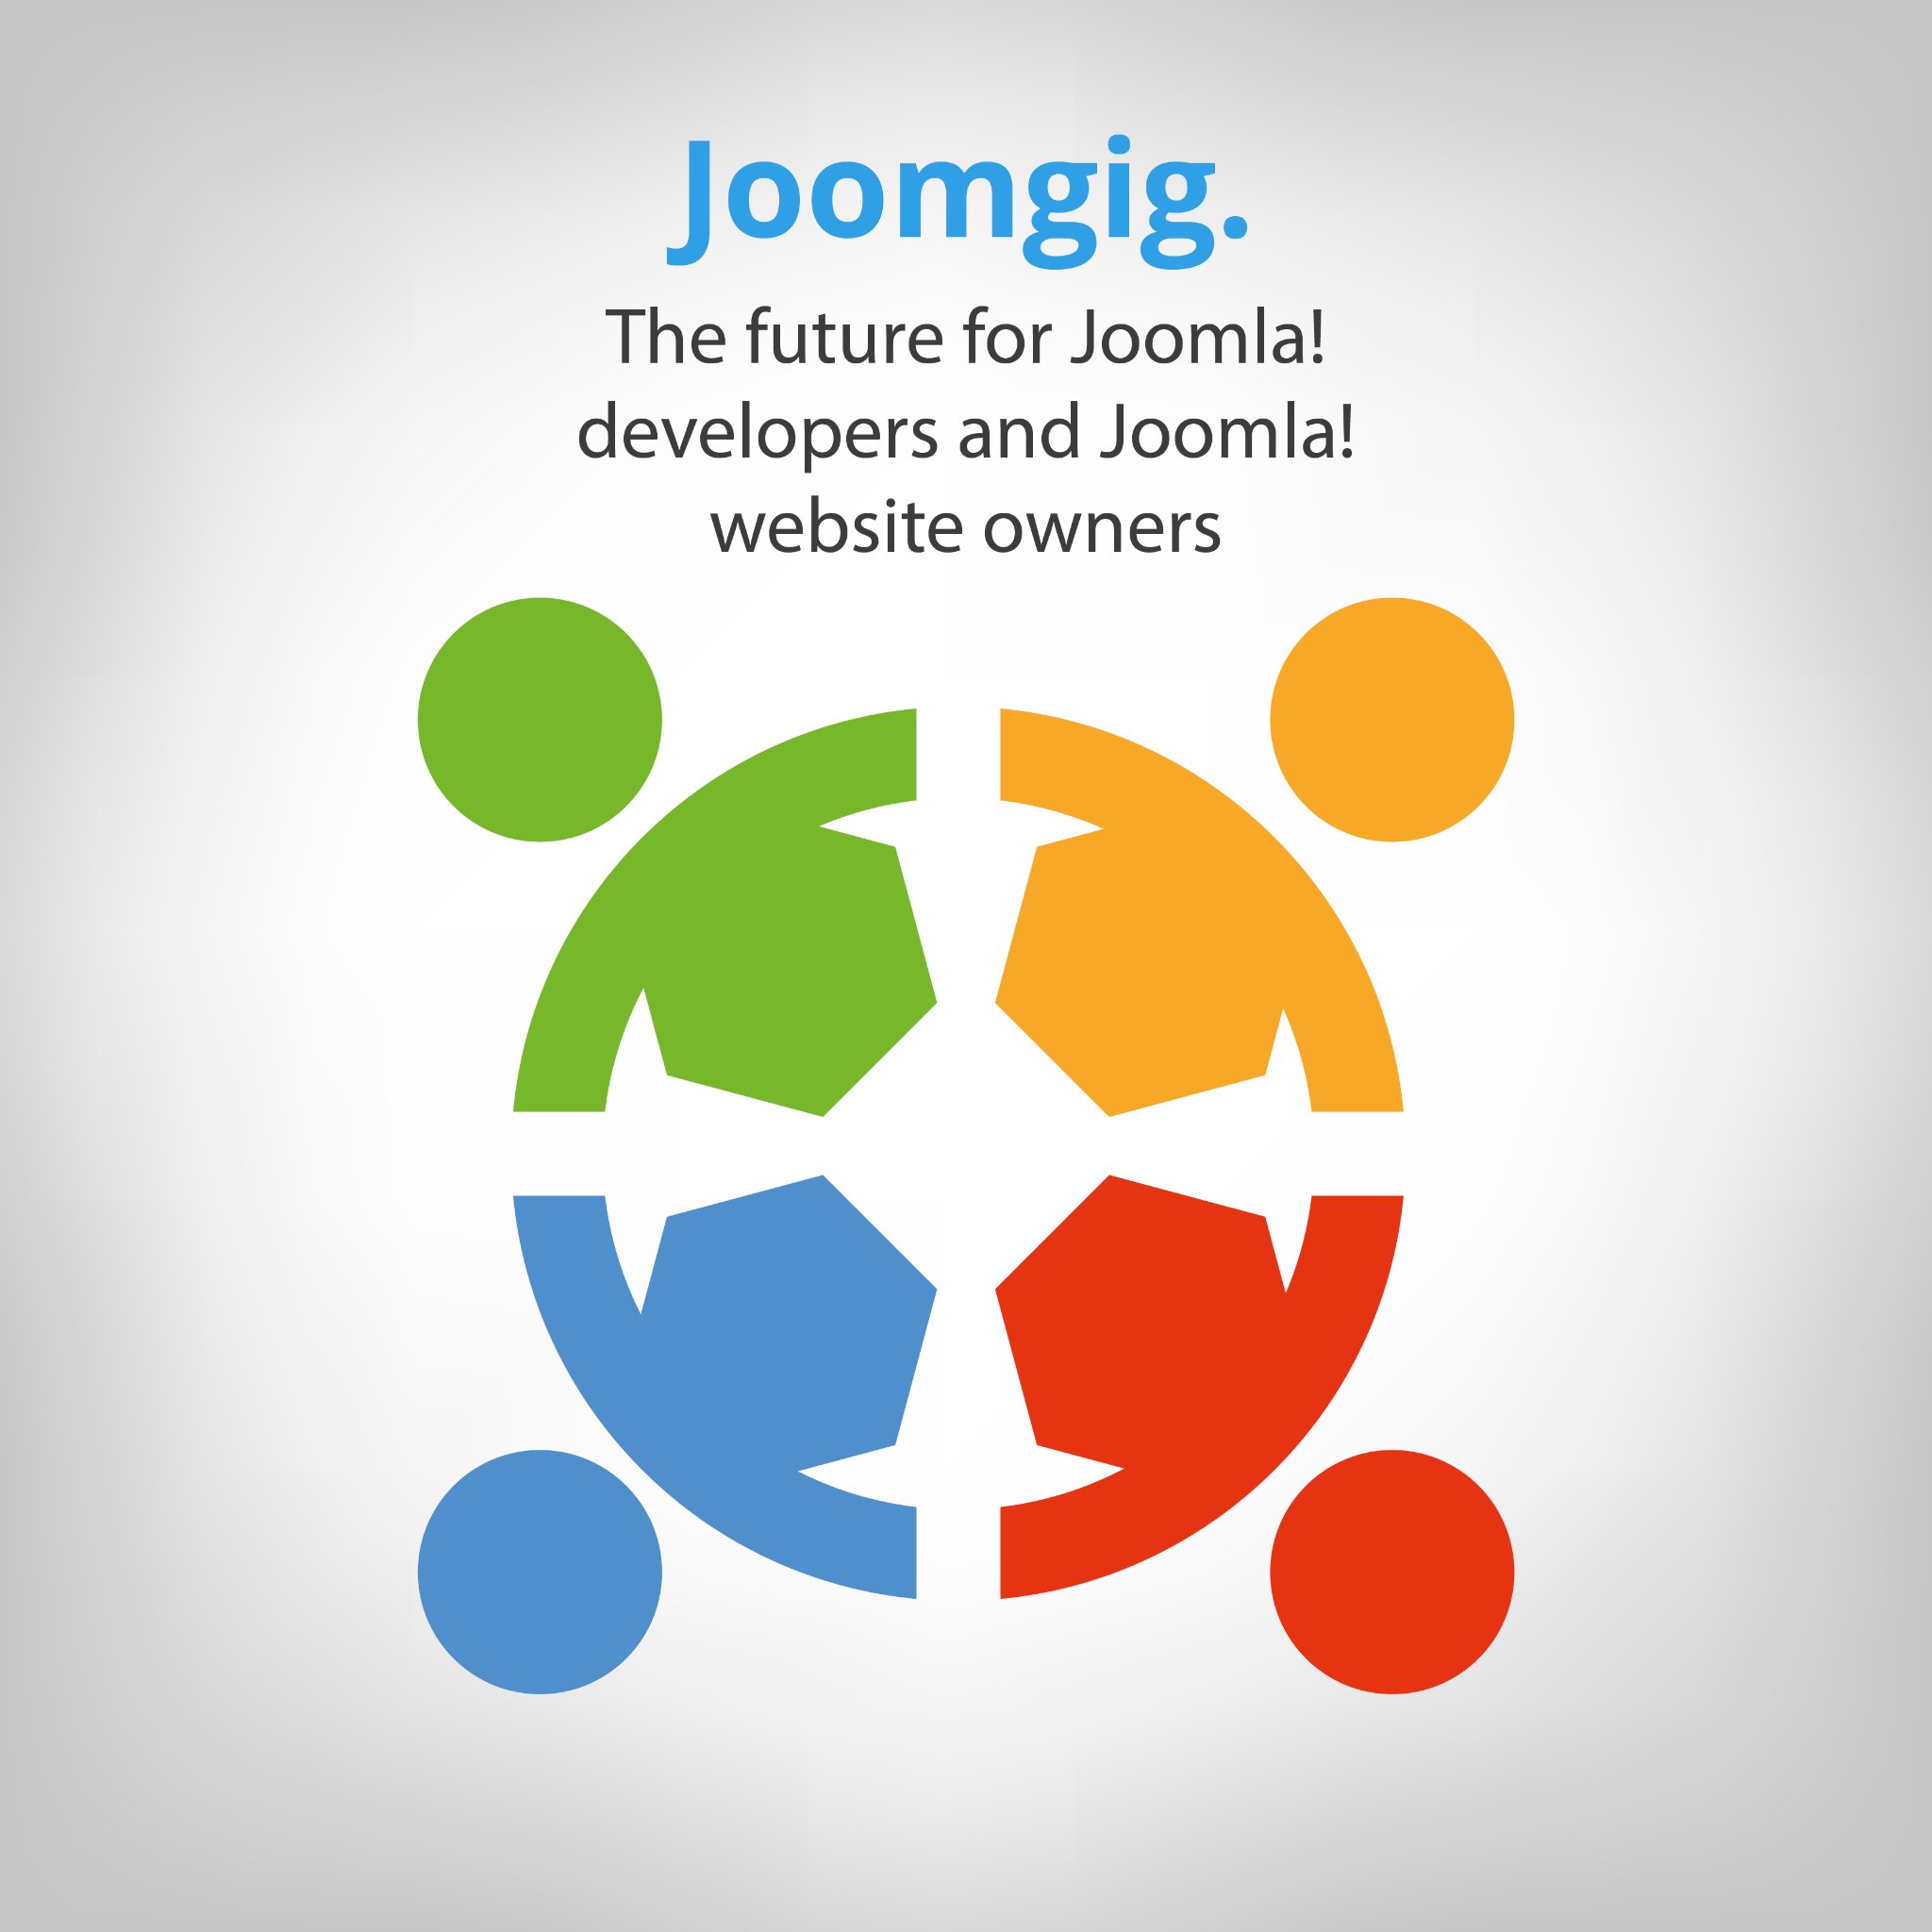 New opportunites coming soon
If you are a Joomla developer, freelancer, site owner or all of the above, Joomgig. is the place for you.